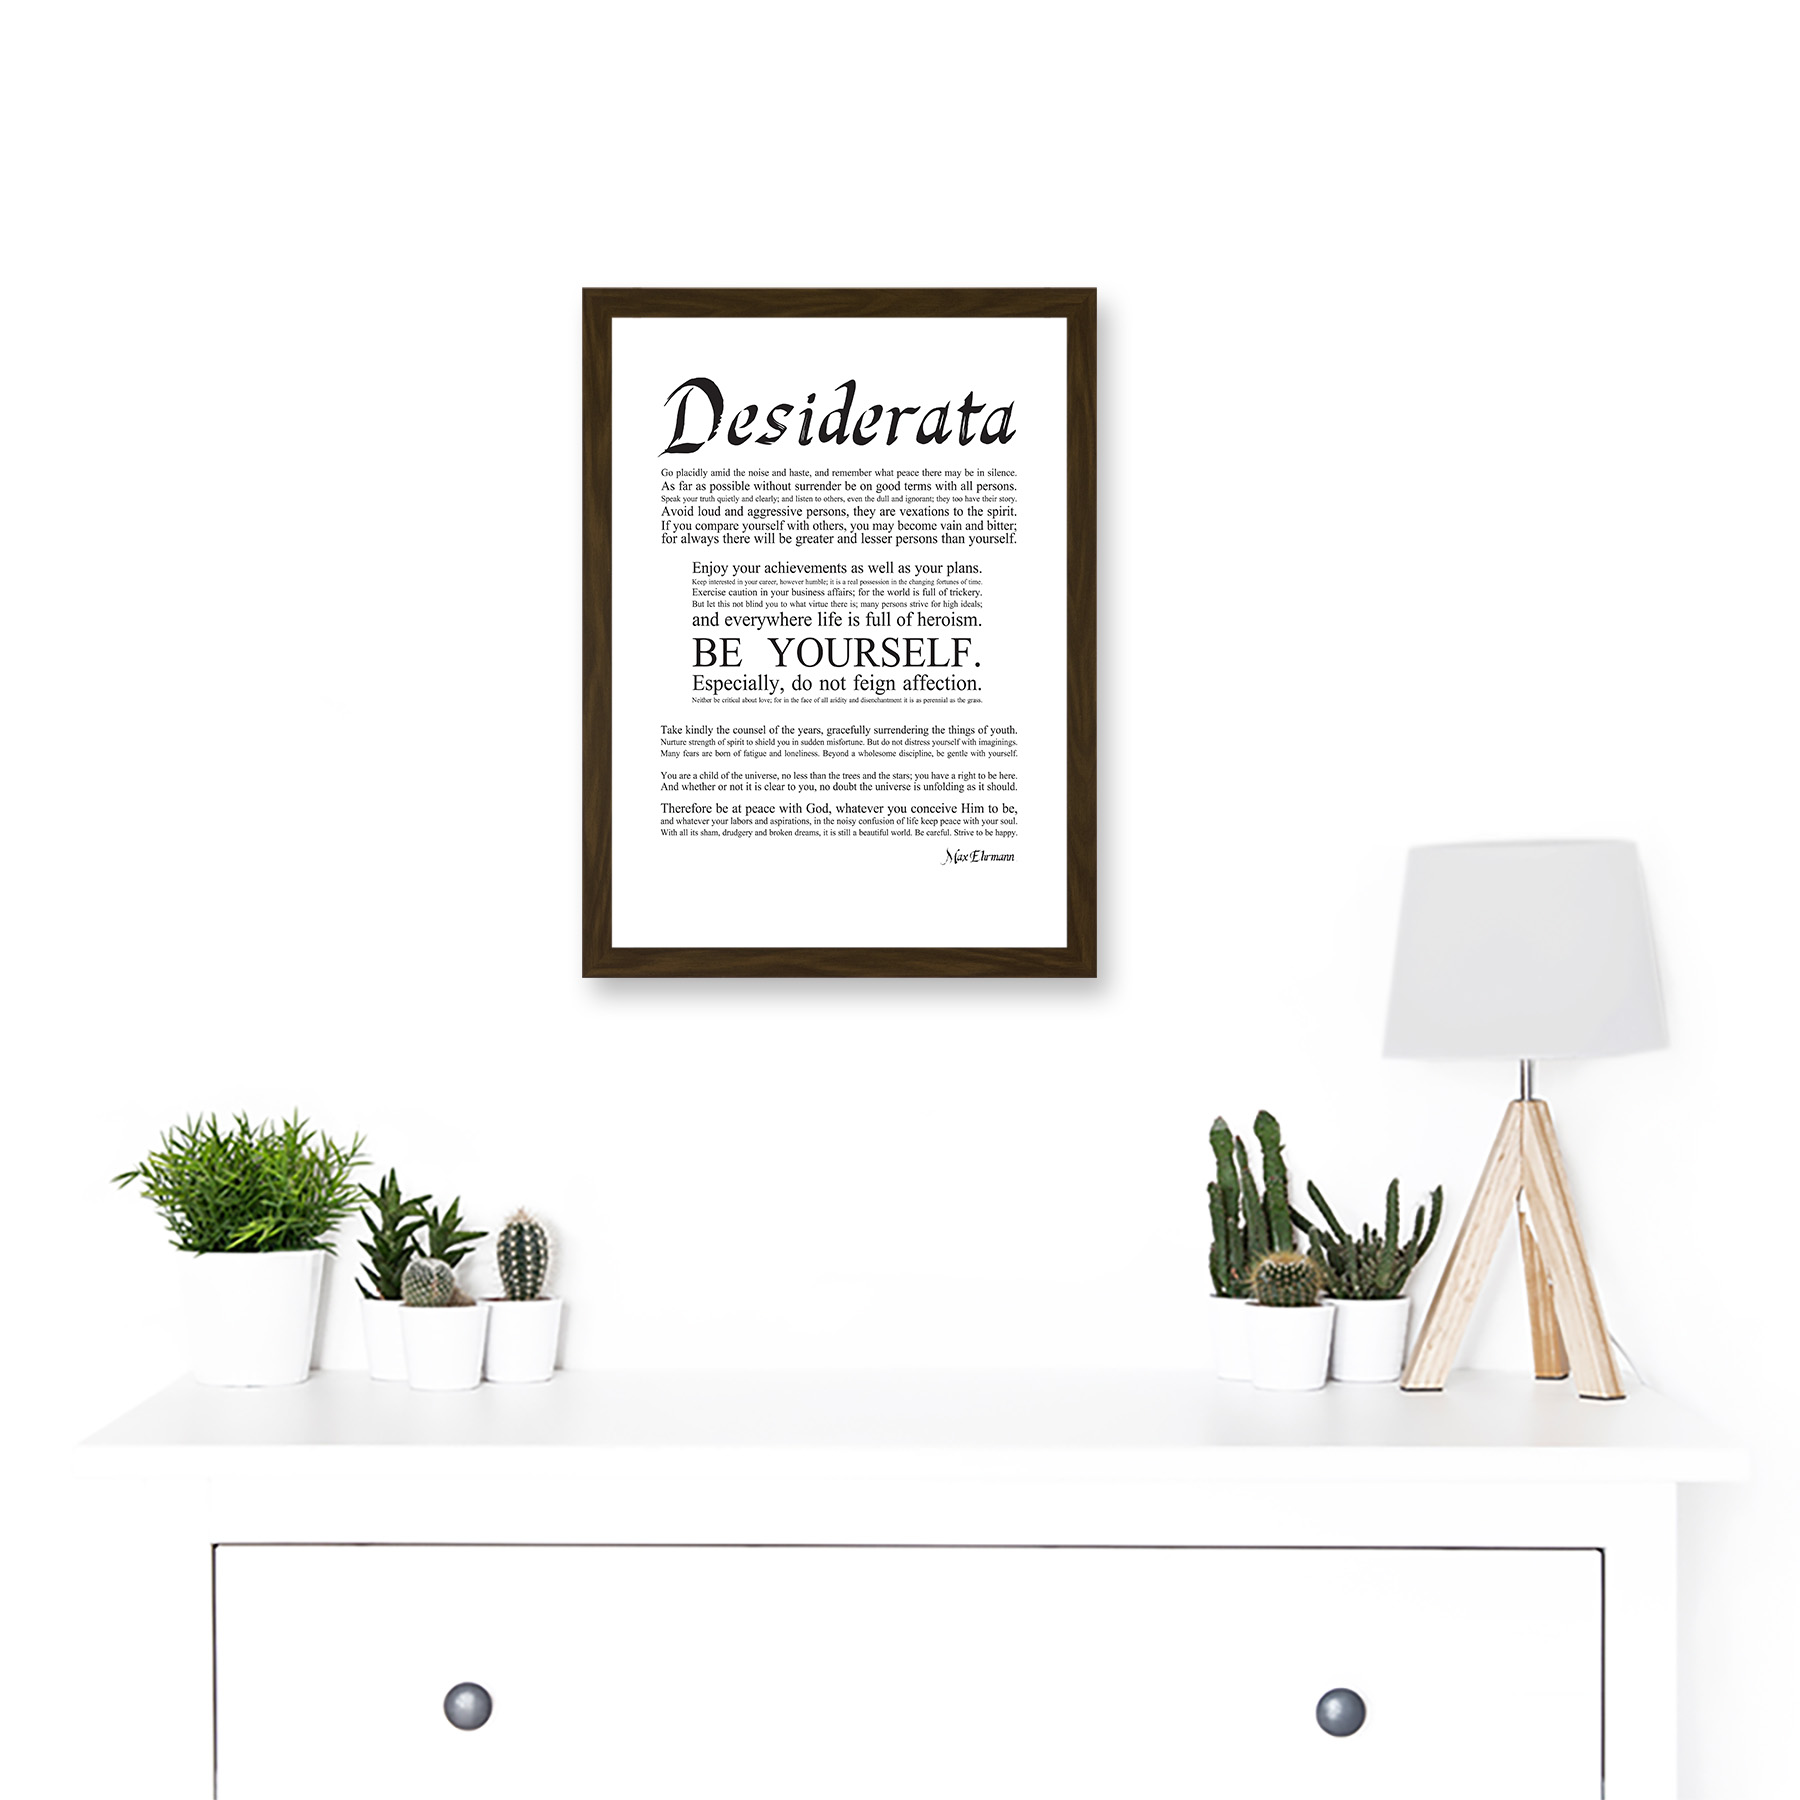 Desiderata Ehrmann Go Placidly Amid Yourself Quote A4 Artwork Framed Wall Art Print - image 2 of 4